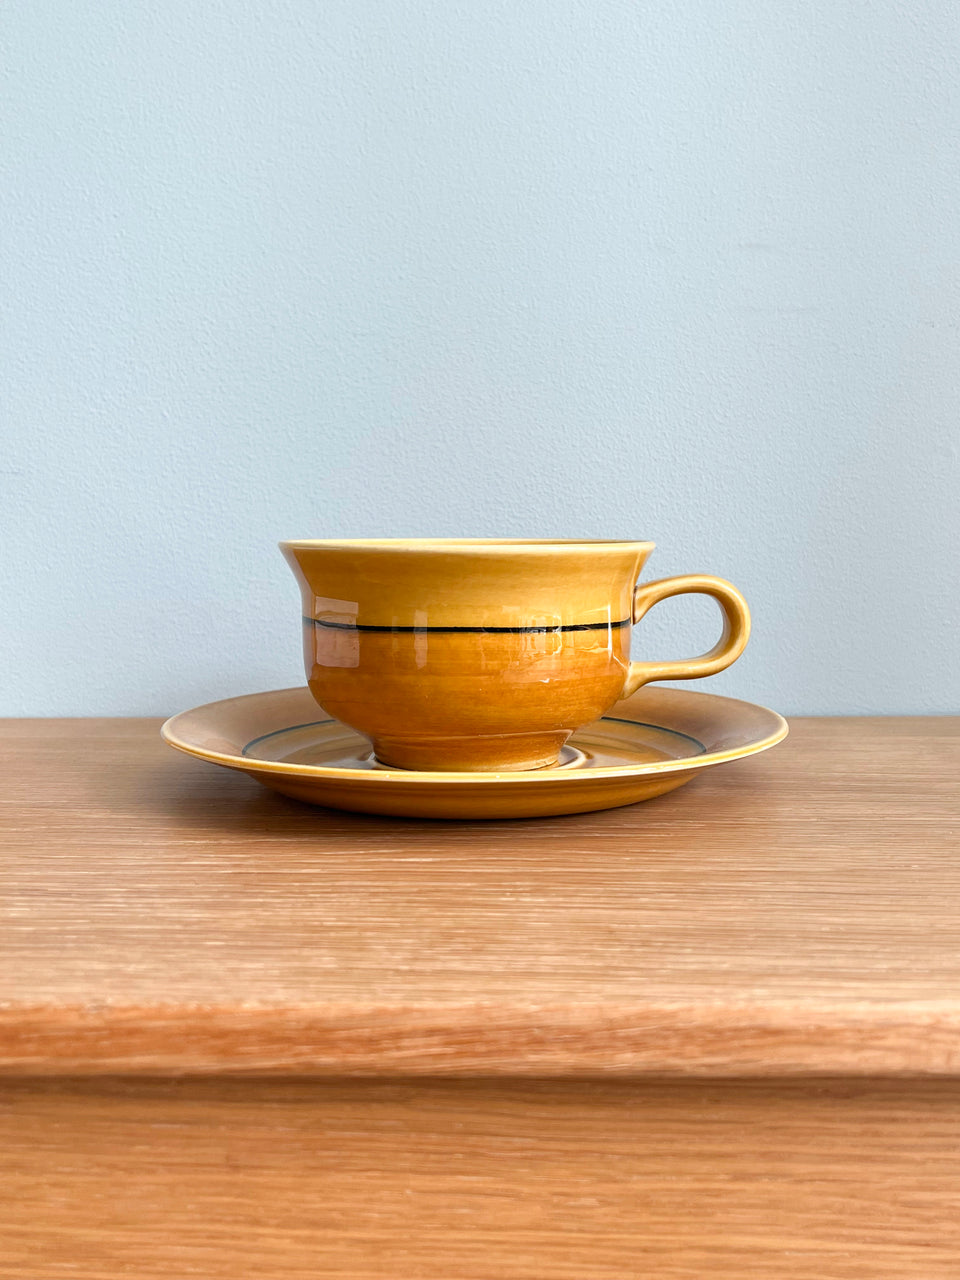 Rørstrand Emma Teacup and Saucer Plate Inger Persson/ロールストランド エマ ティーカップ&ソーサー プレート インガー・パーソン 北欧ヴィンテージ食器